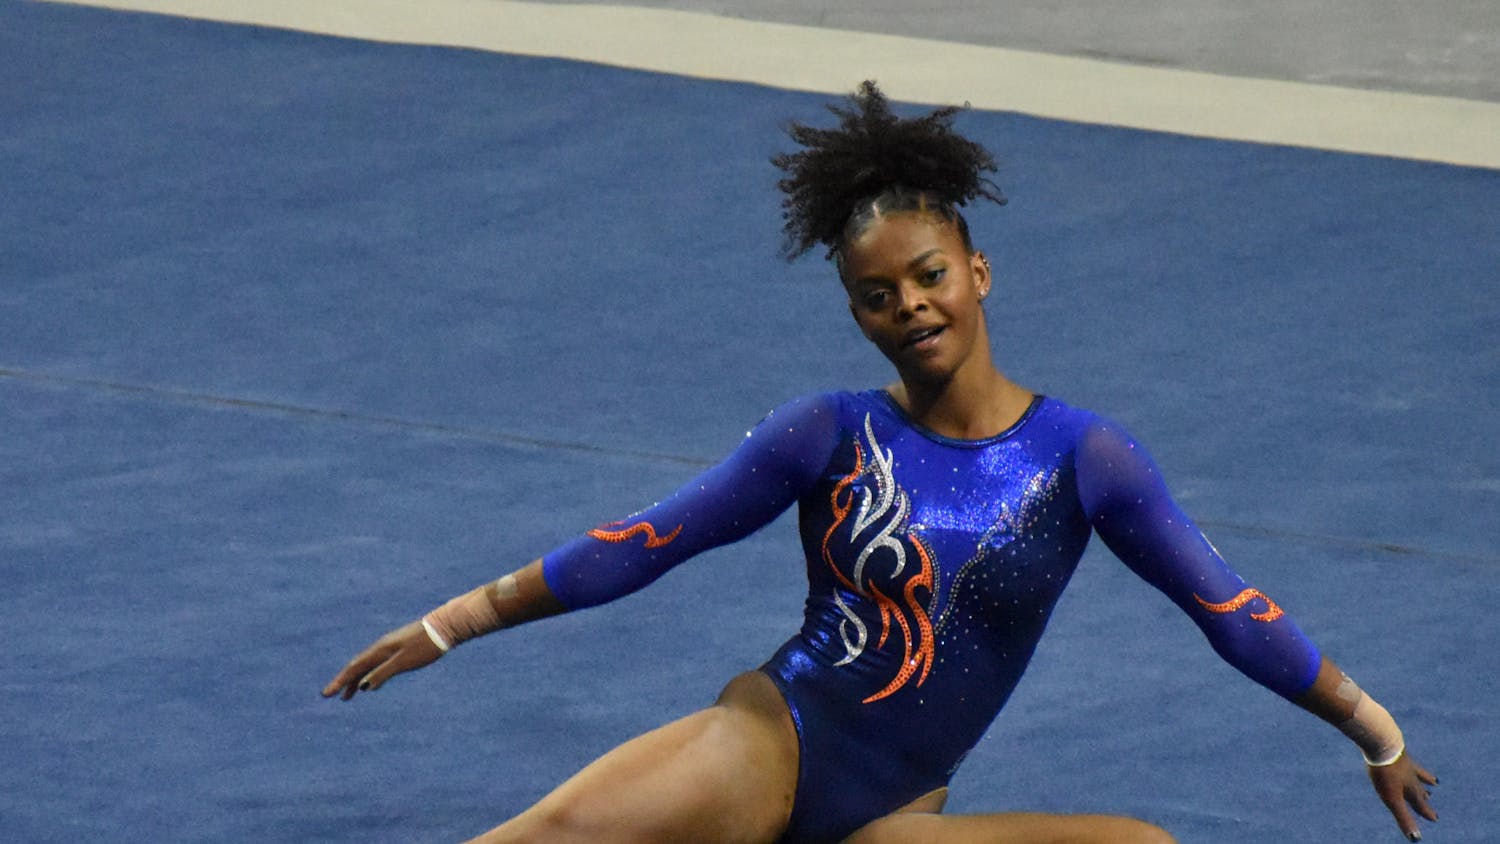 Trinity Thomas grabbed the top spot on the floor, recording a 9.950 Friday night.